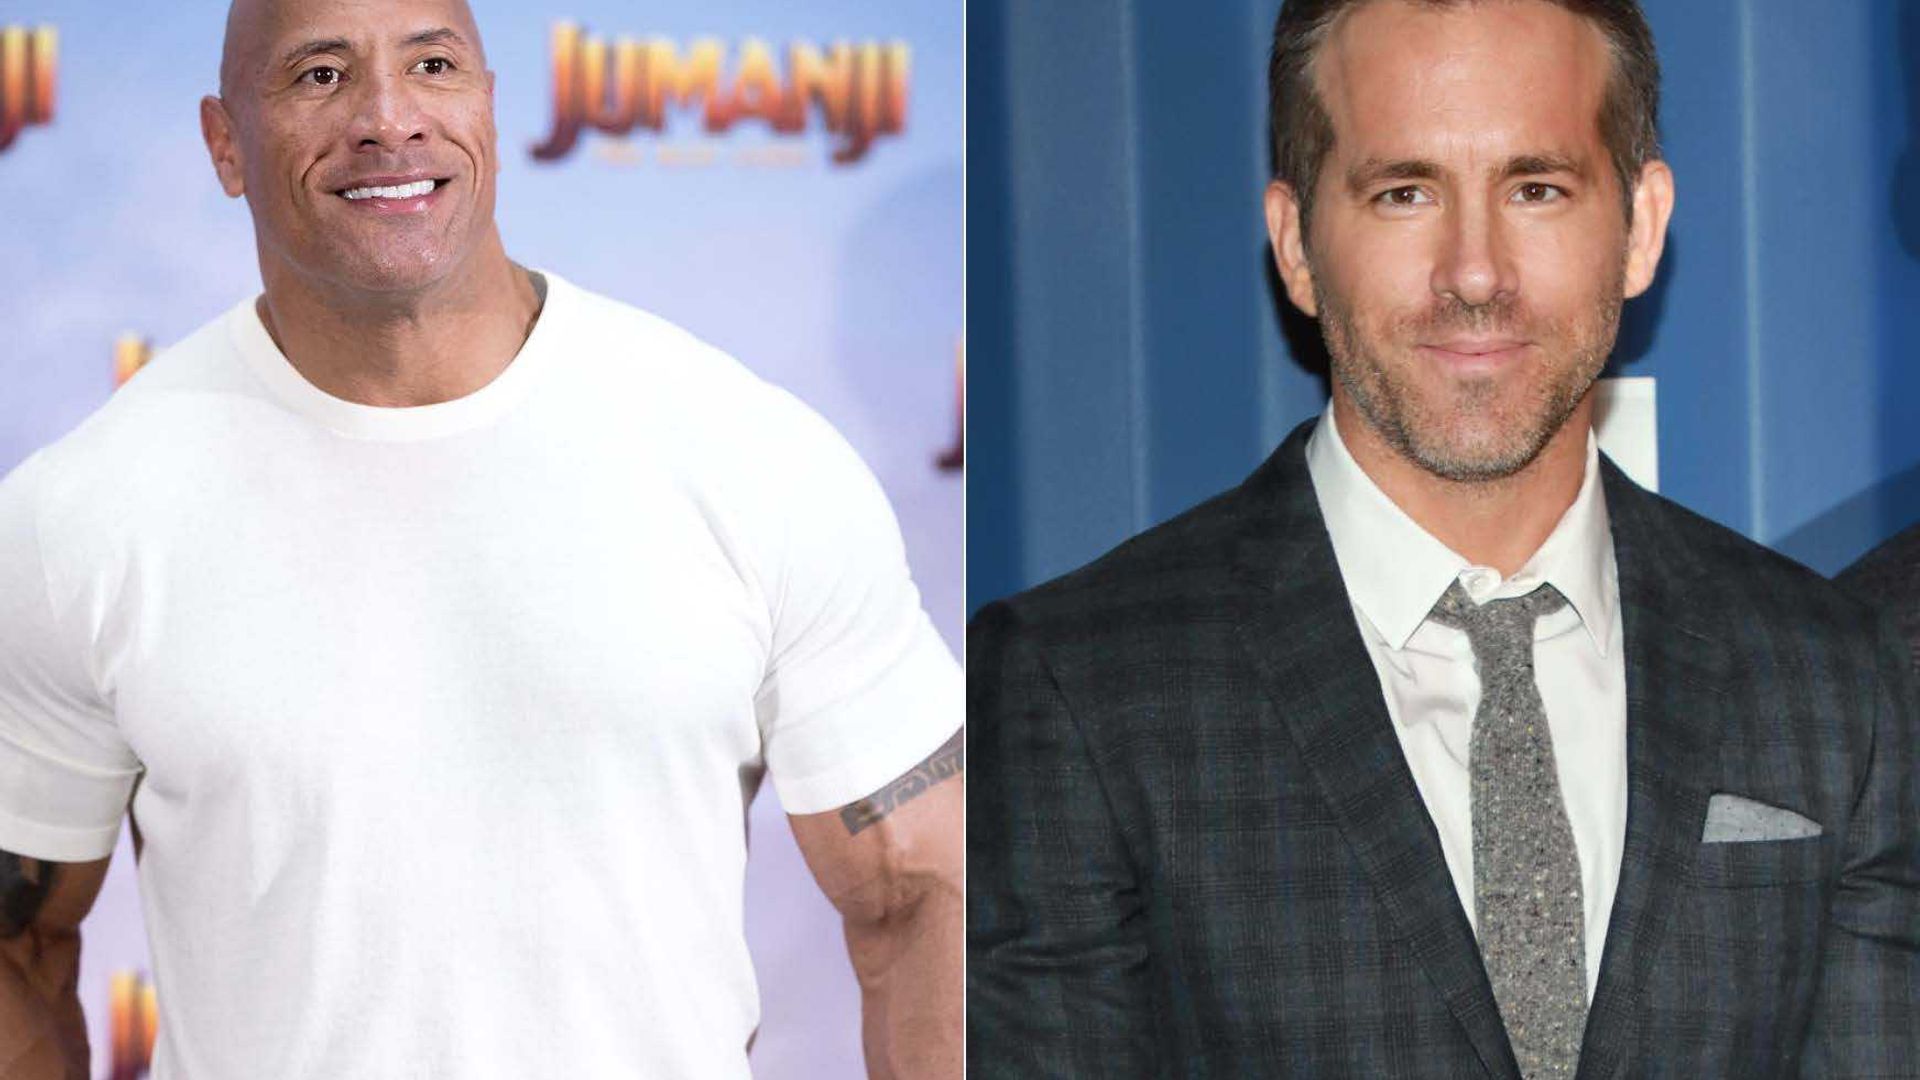 Dwayne Johnson tore his front gate off with his bare hands – and Ryan Reynolds had the best response